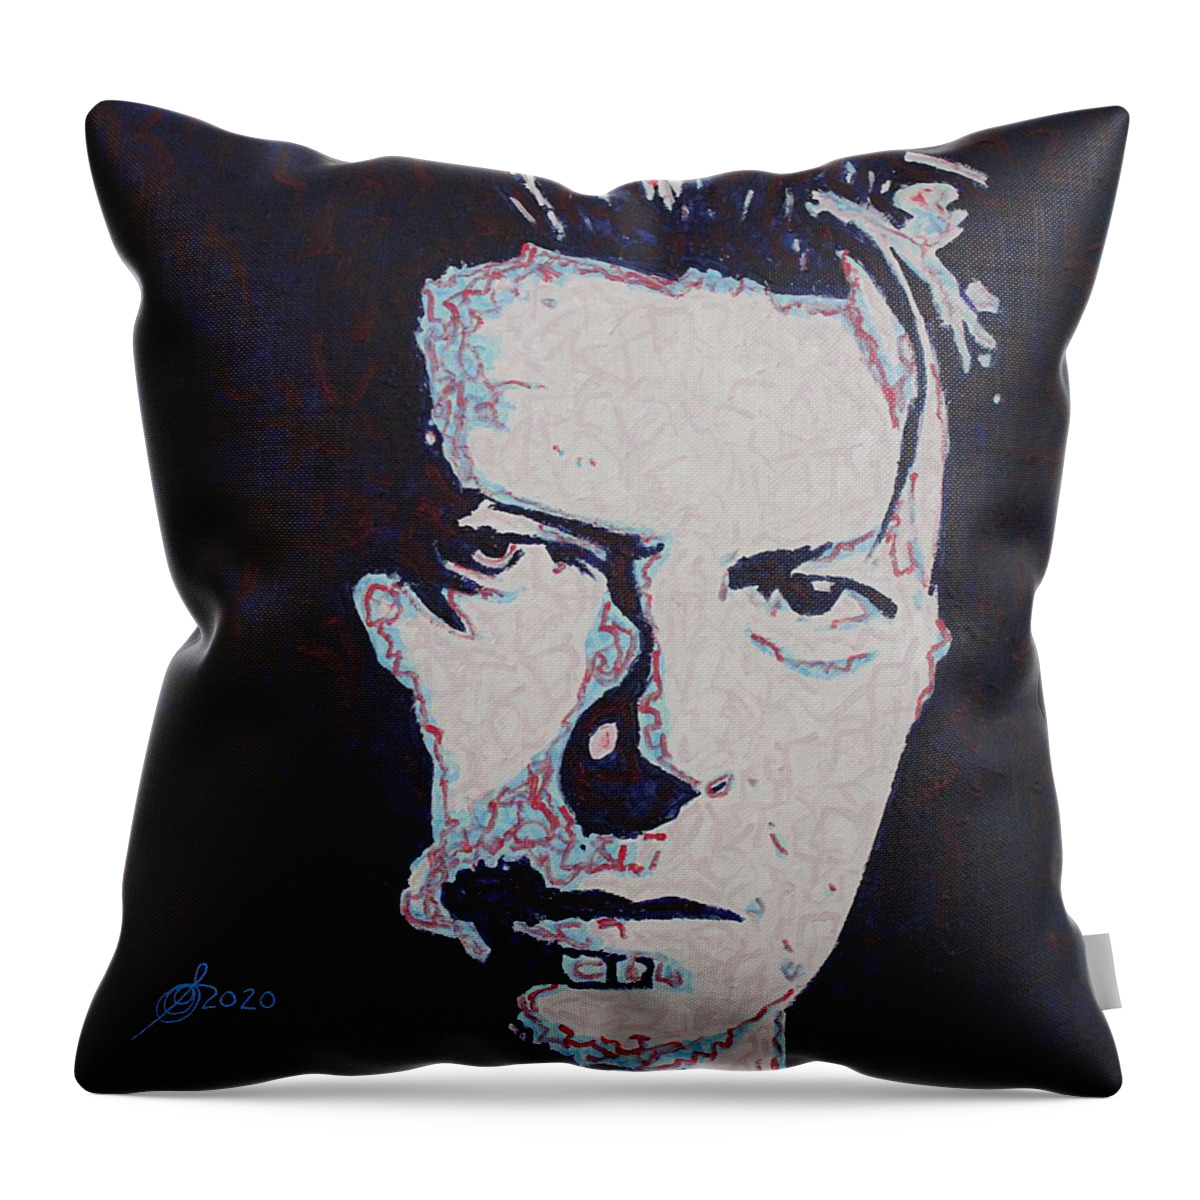 David Bowie Throw Pillow featuring the painting David Bowie original painting by Sol Luckman